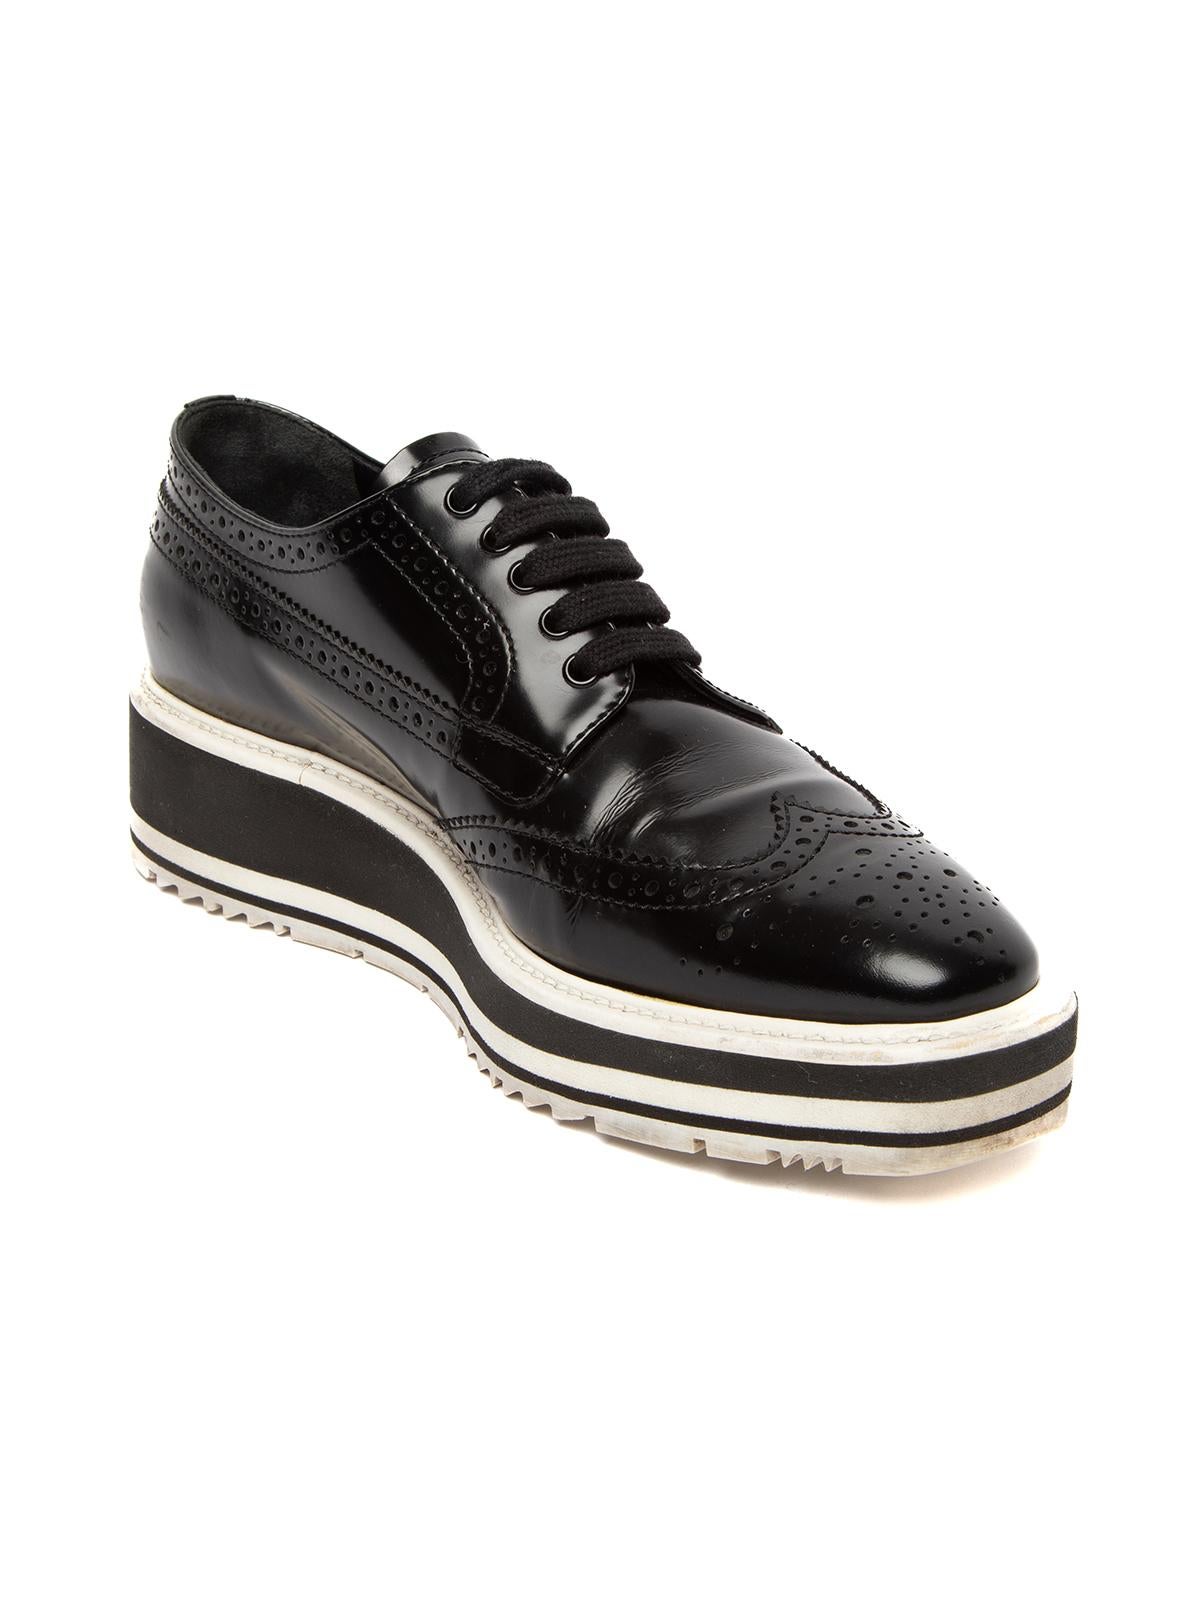 CONDITION is Good. Natural creasing of leather, scuffs and marks are evident on mid sole and wear on sole of these used Prada designer resale brogues. Details Black leather brogues with oversized platform sole Almond-toe with brogue detailing